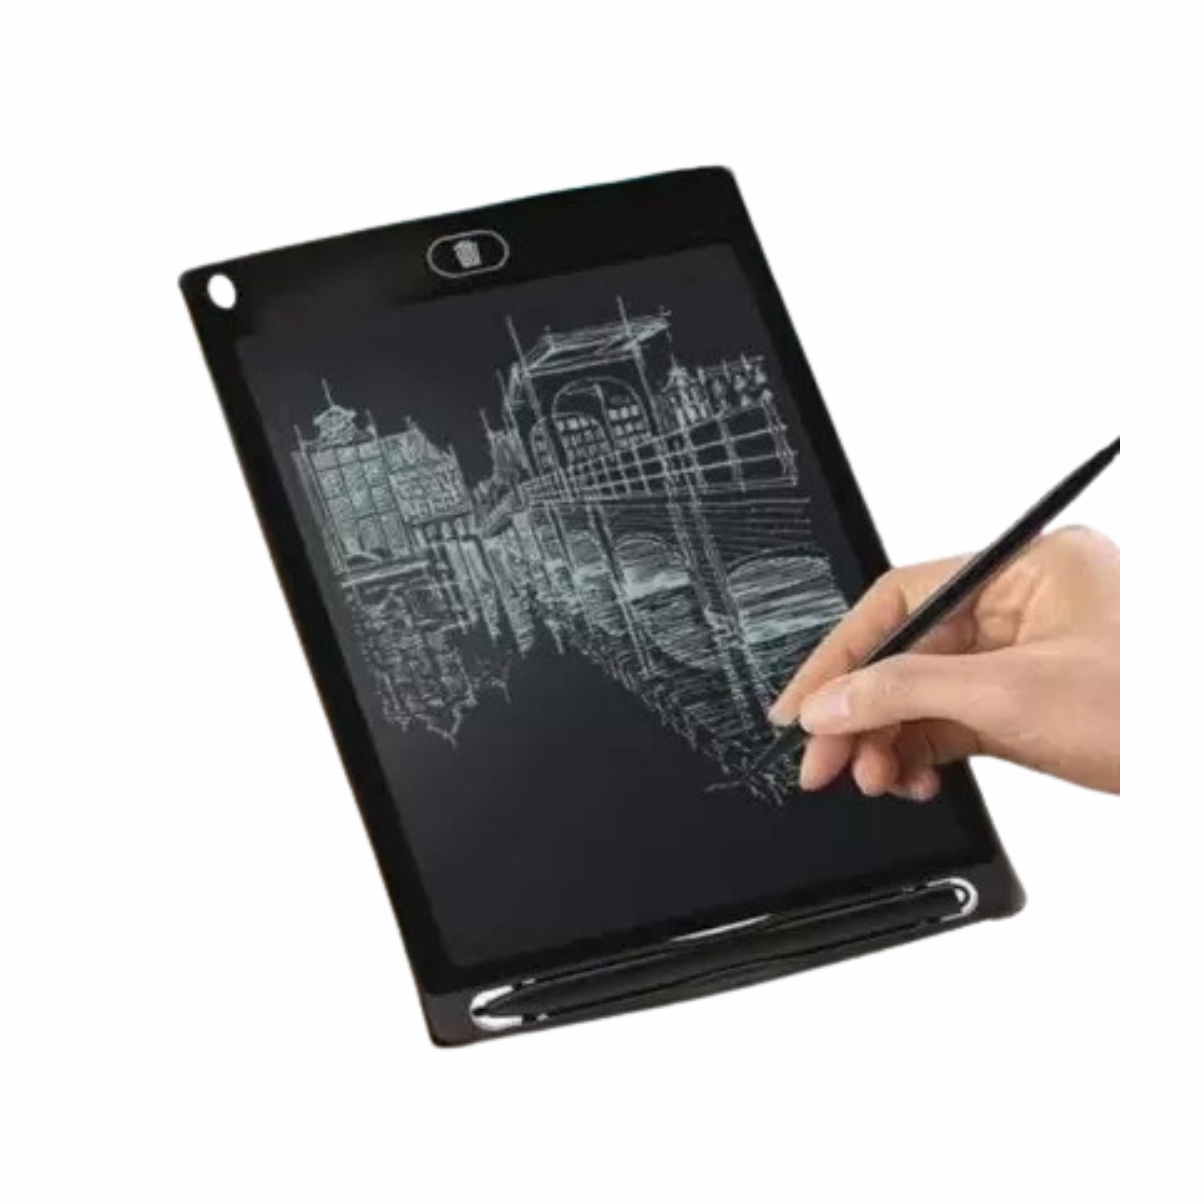 KS STORE LCD Writing Pad, Cool Toy For Kids (Black)